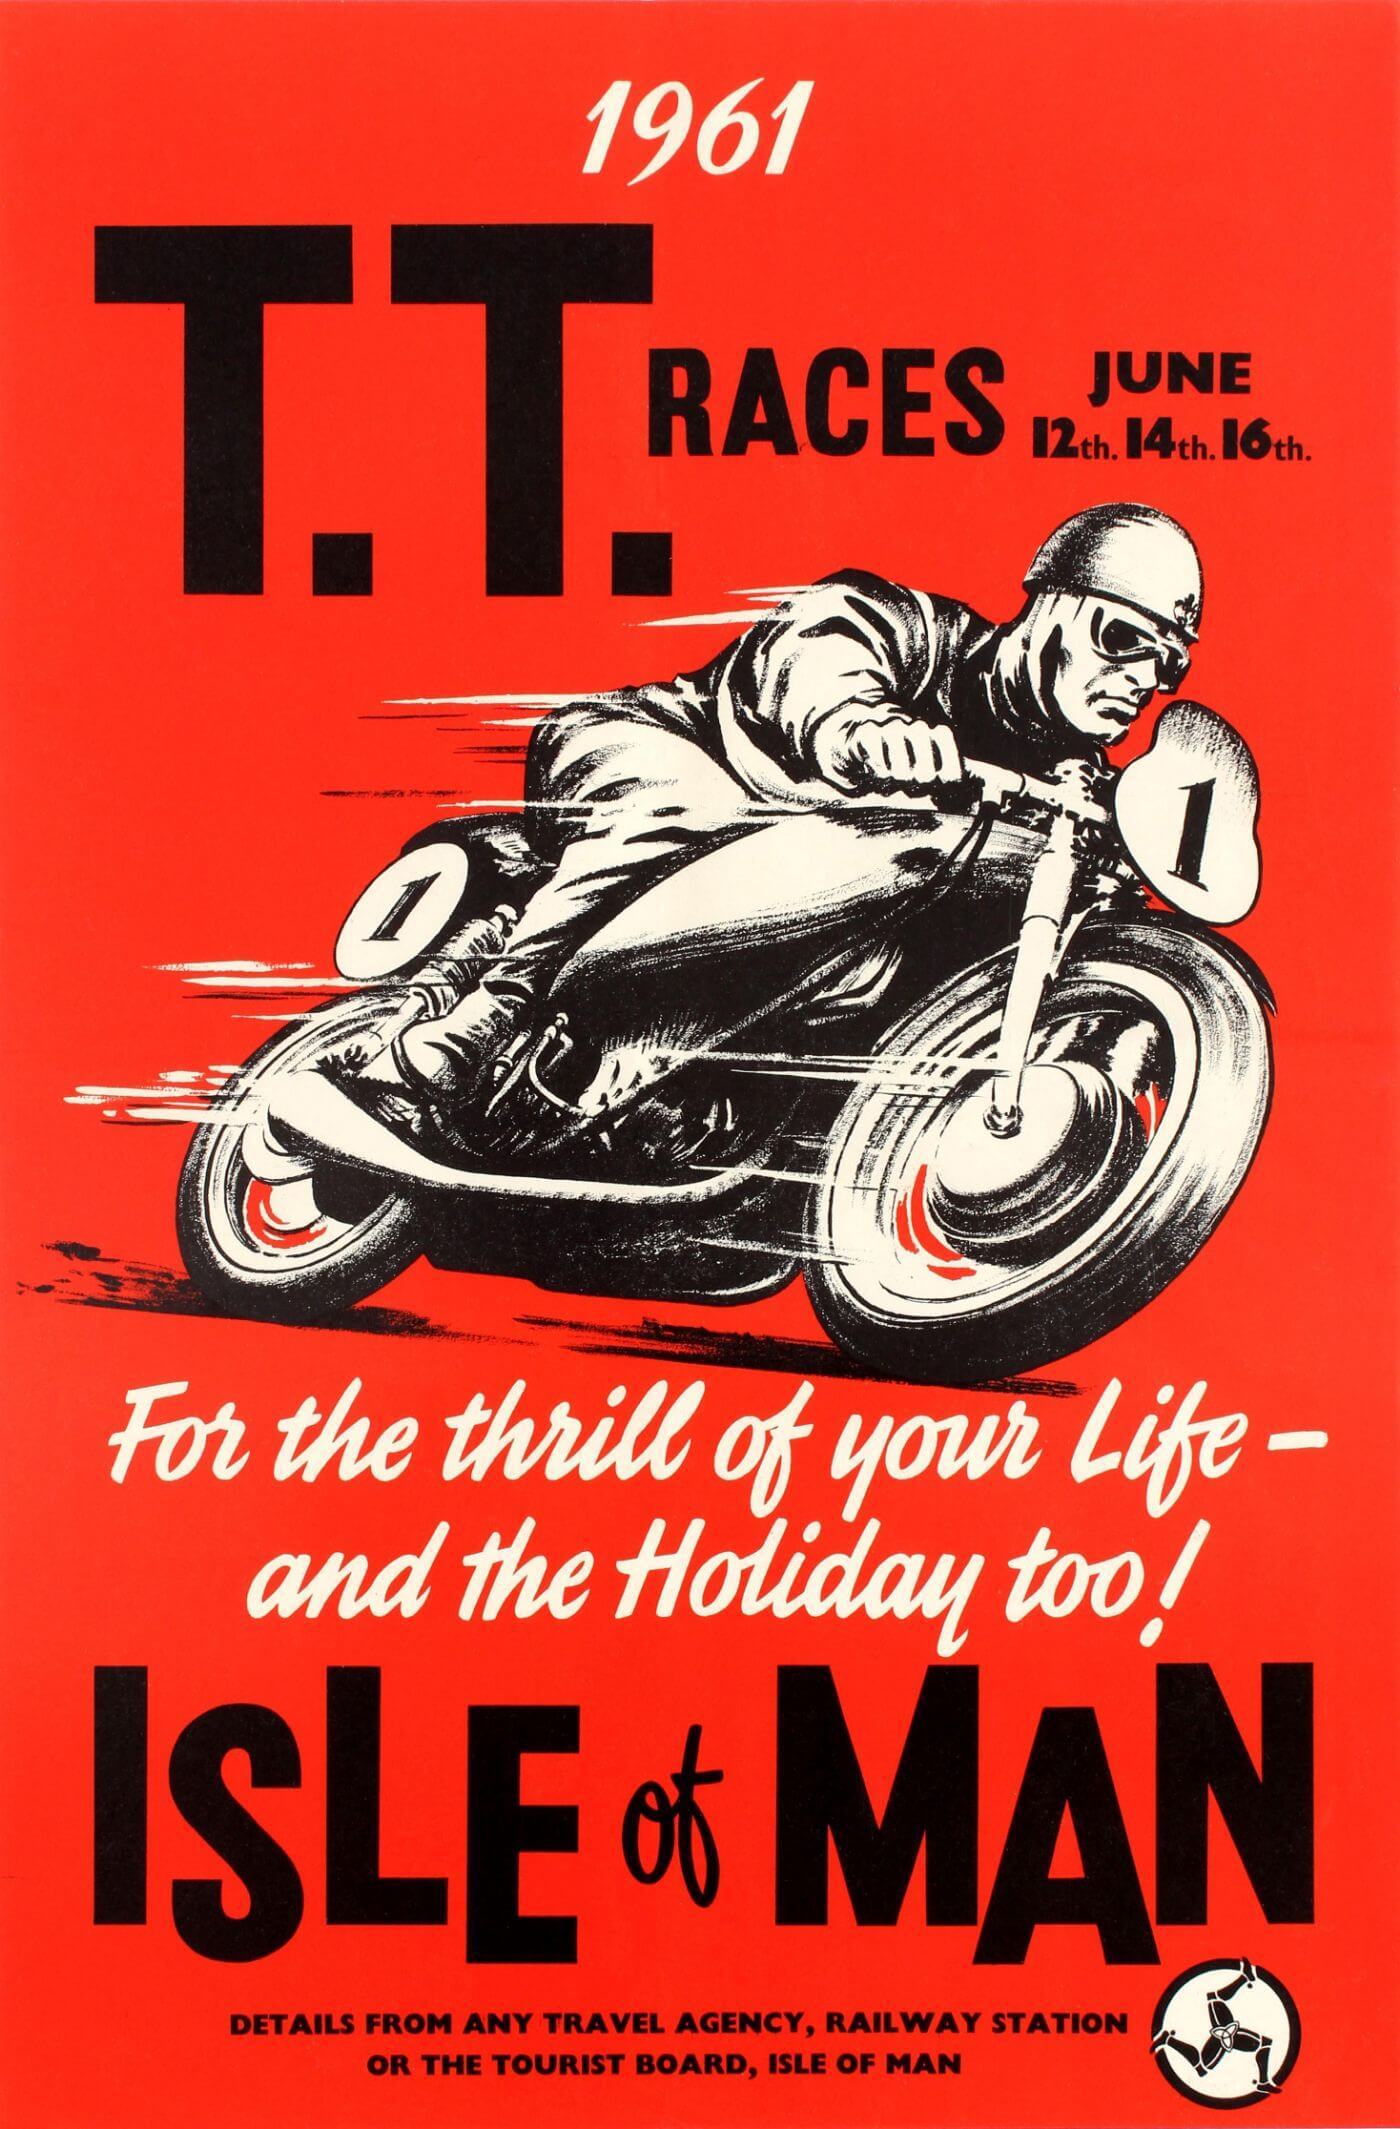 TT Race poster - Life Size Posters 